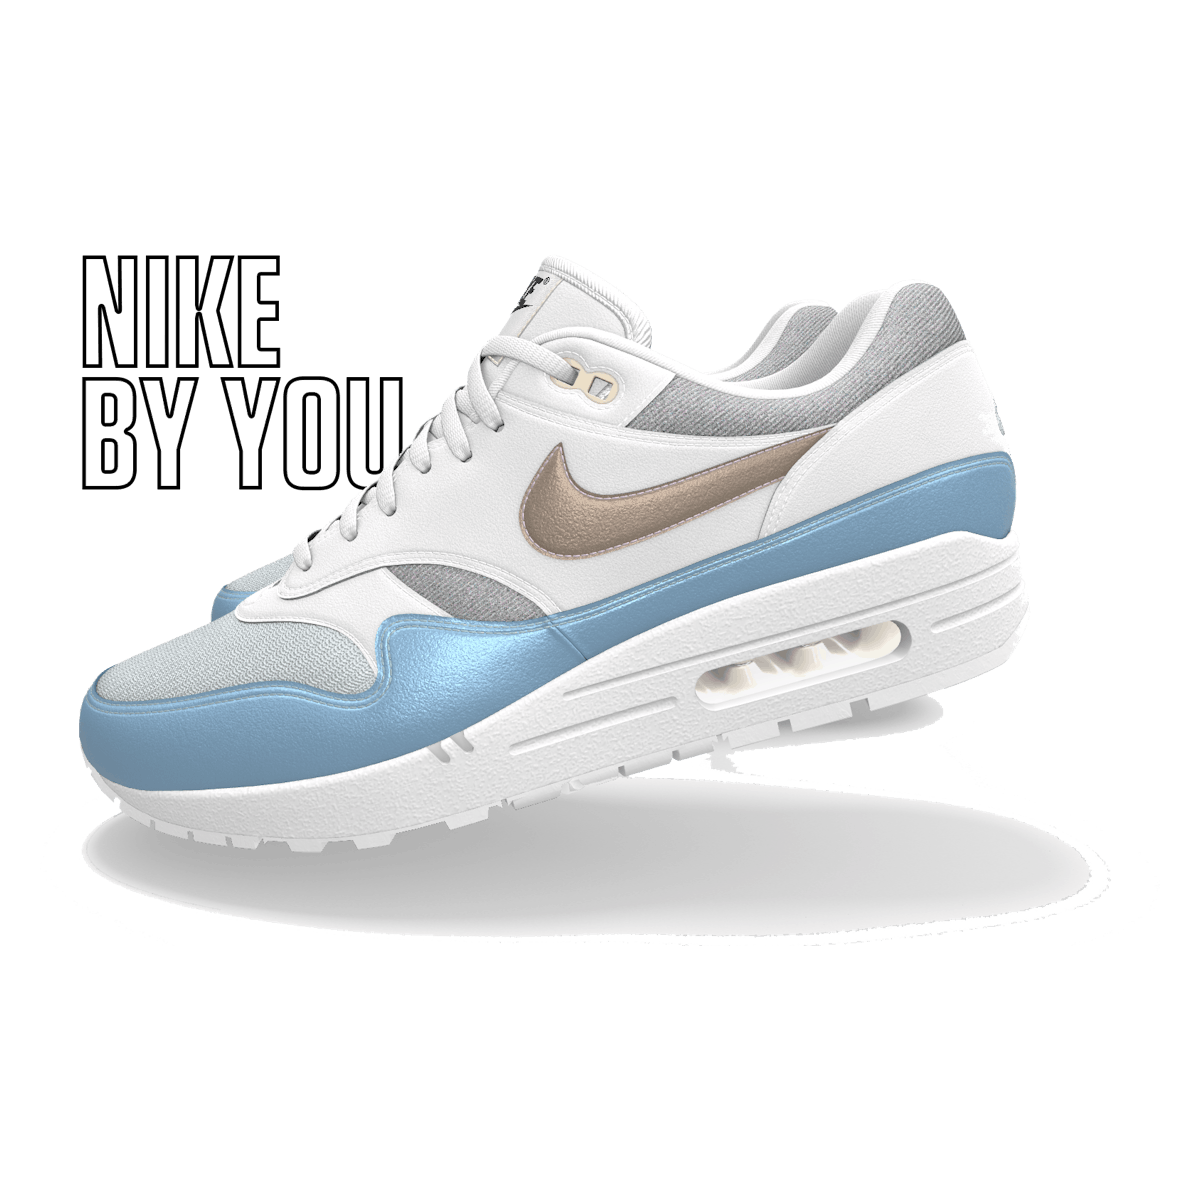 Nike Air Max 1 '87 "By You" 2024